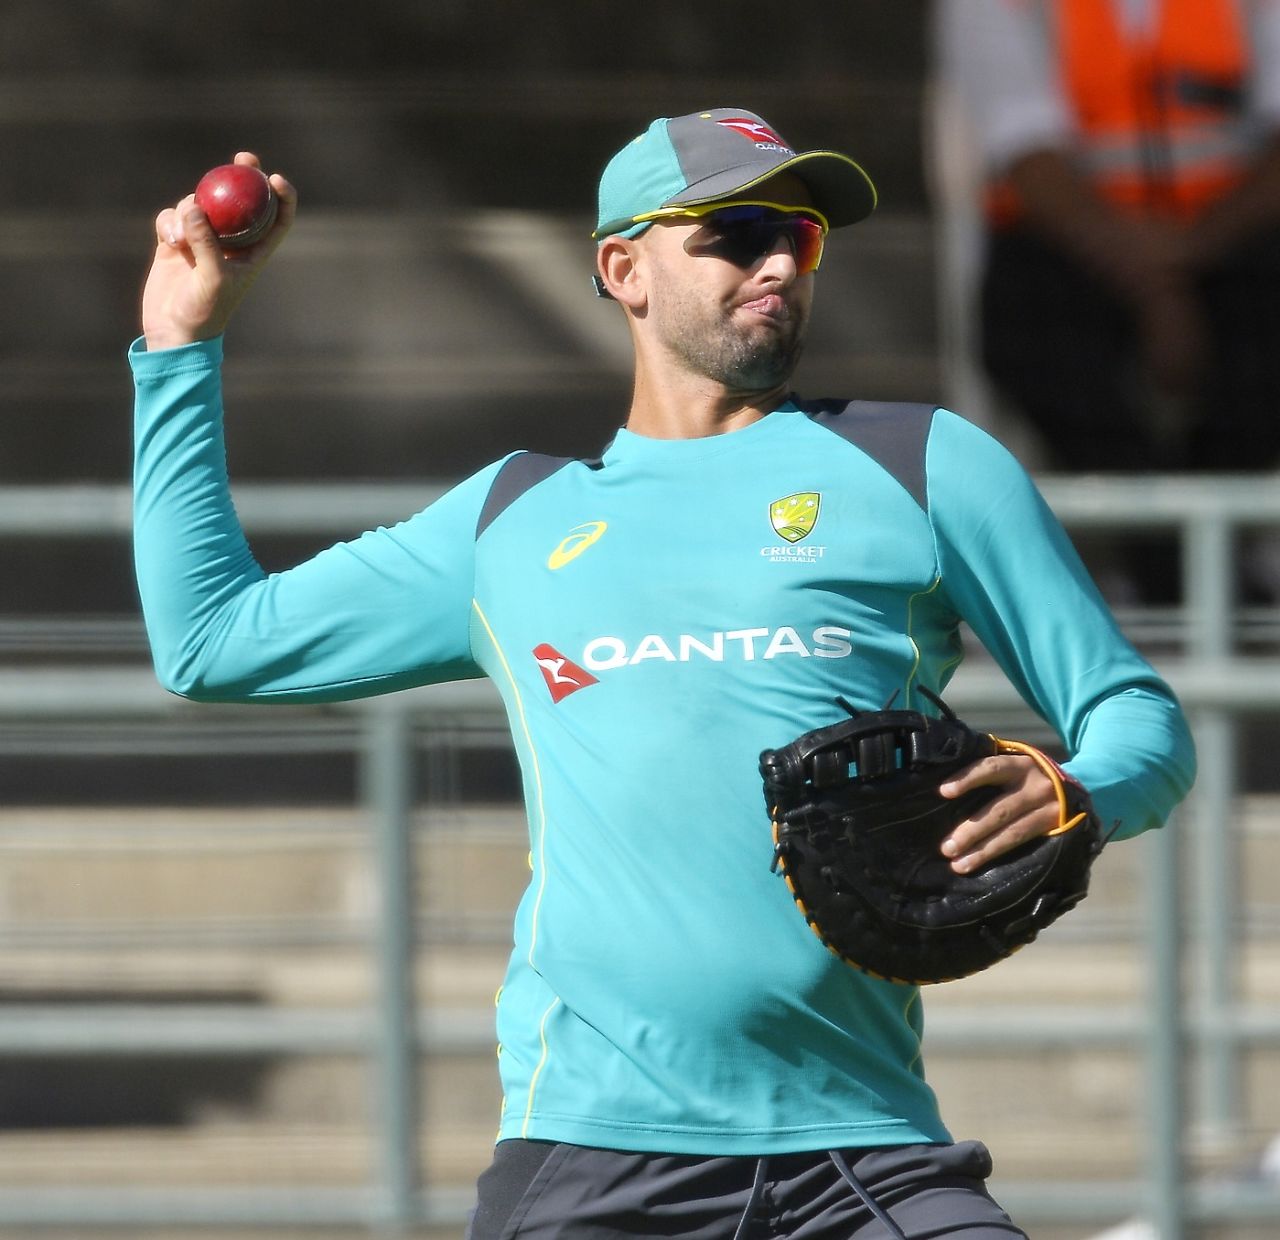 Nathan Lyon during training at Newlands, South Africa v Australia, Cape Town, March 19, 2018